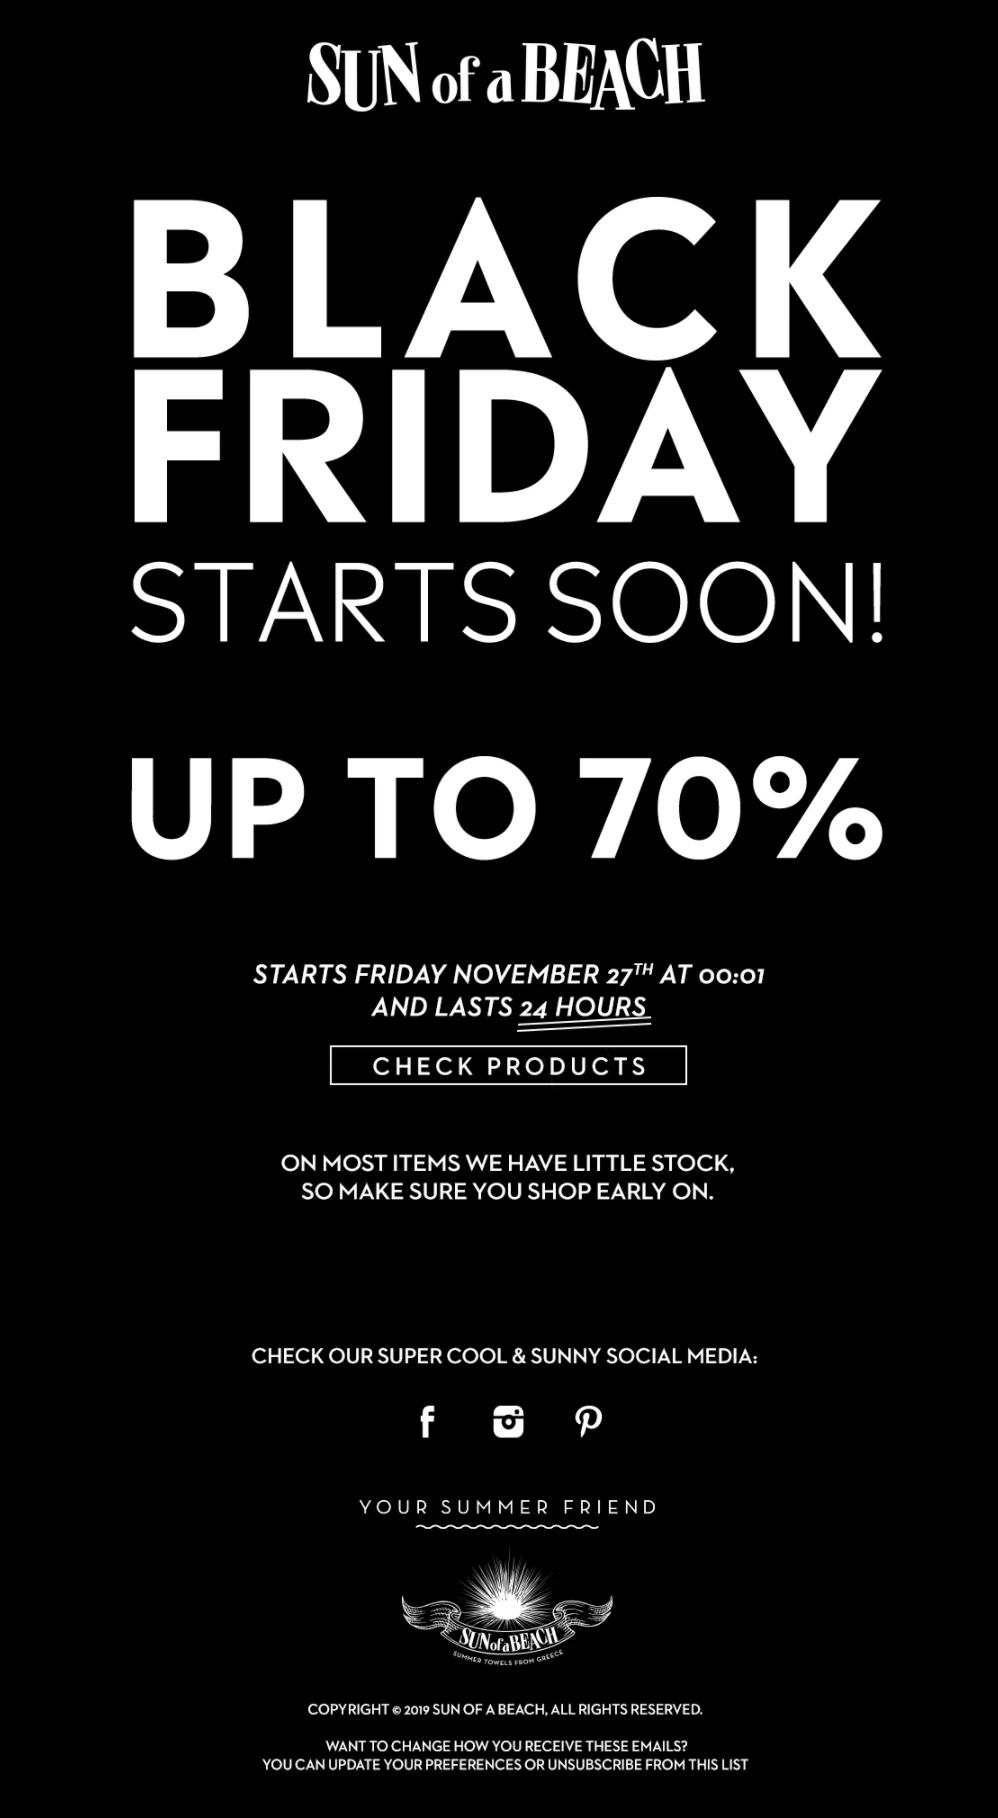 Sun of a Beach Black Friday email example